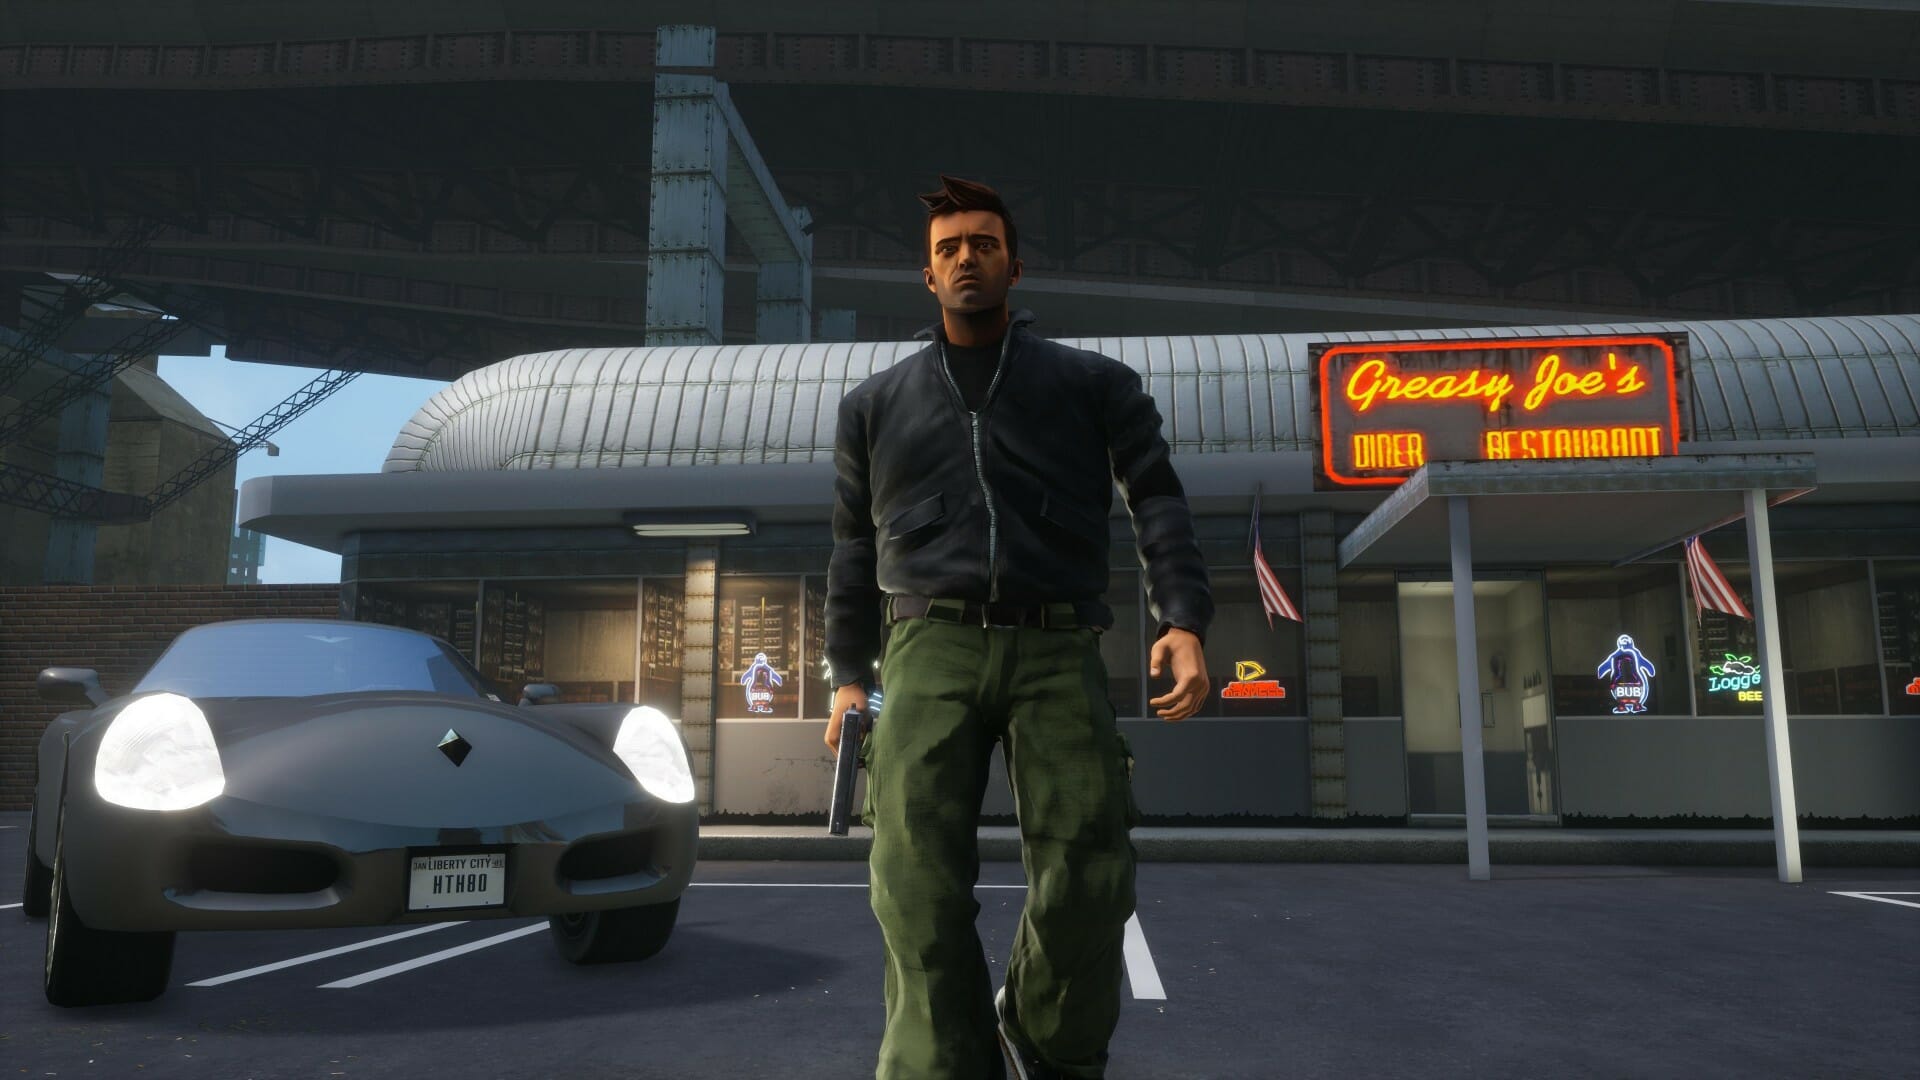 Grand Theft Auto: The Trilogy – The Definitive Edition and More